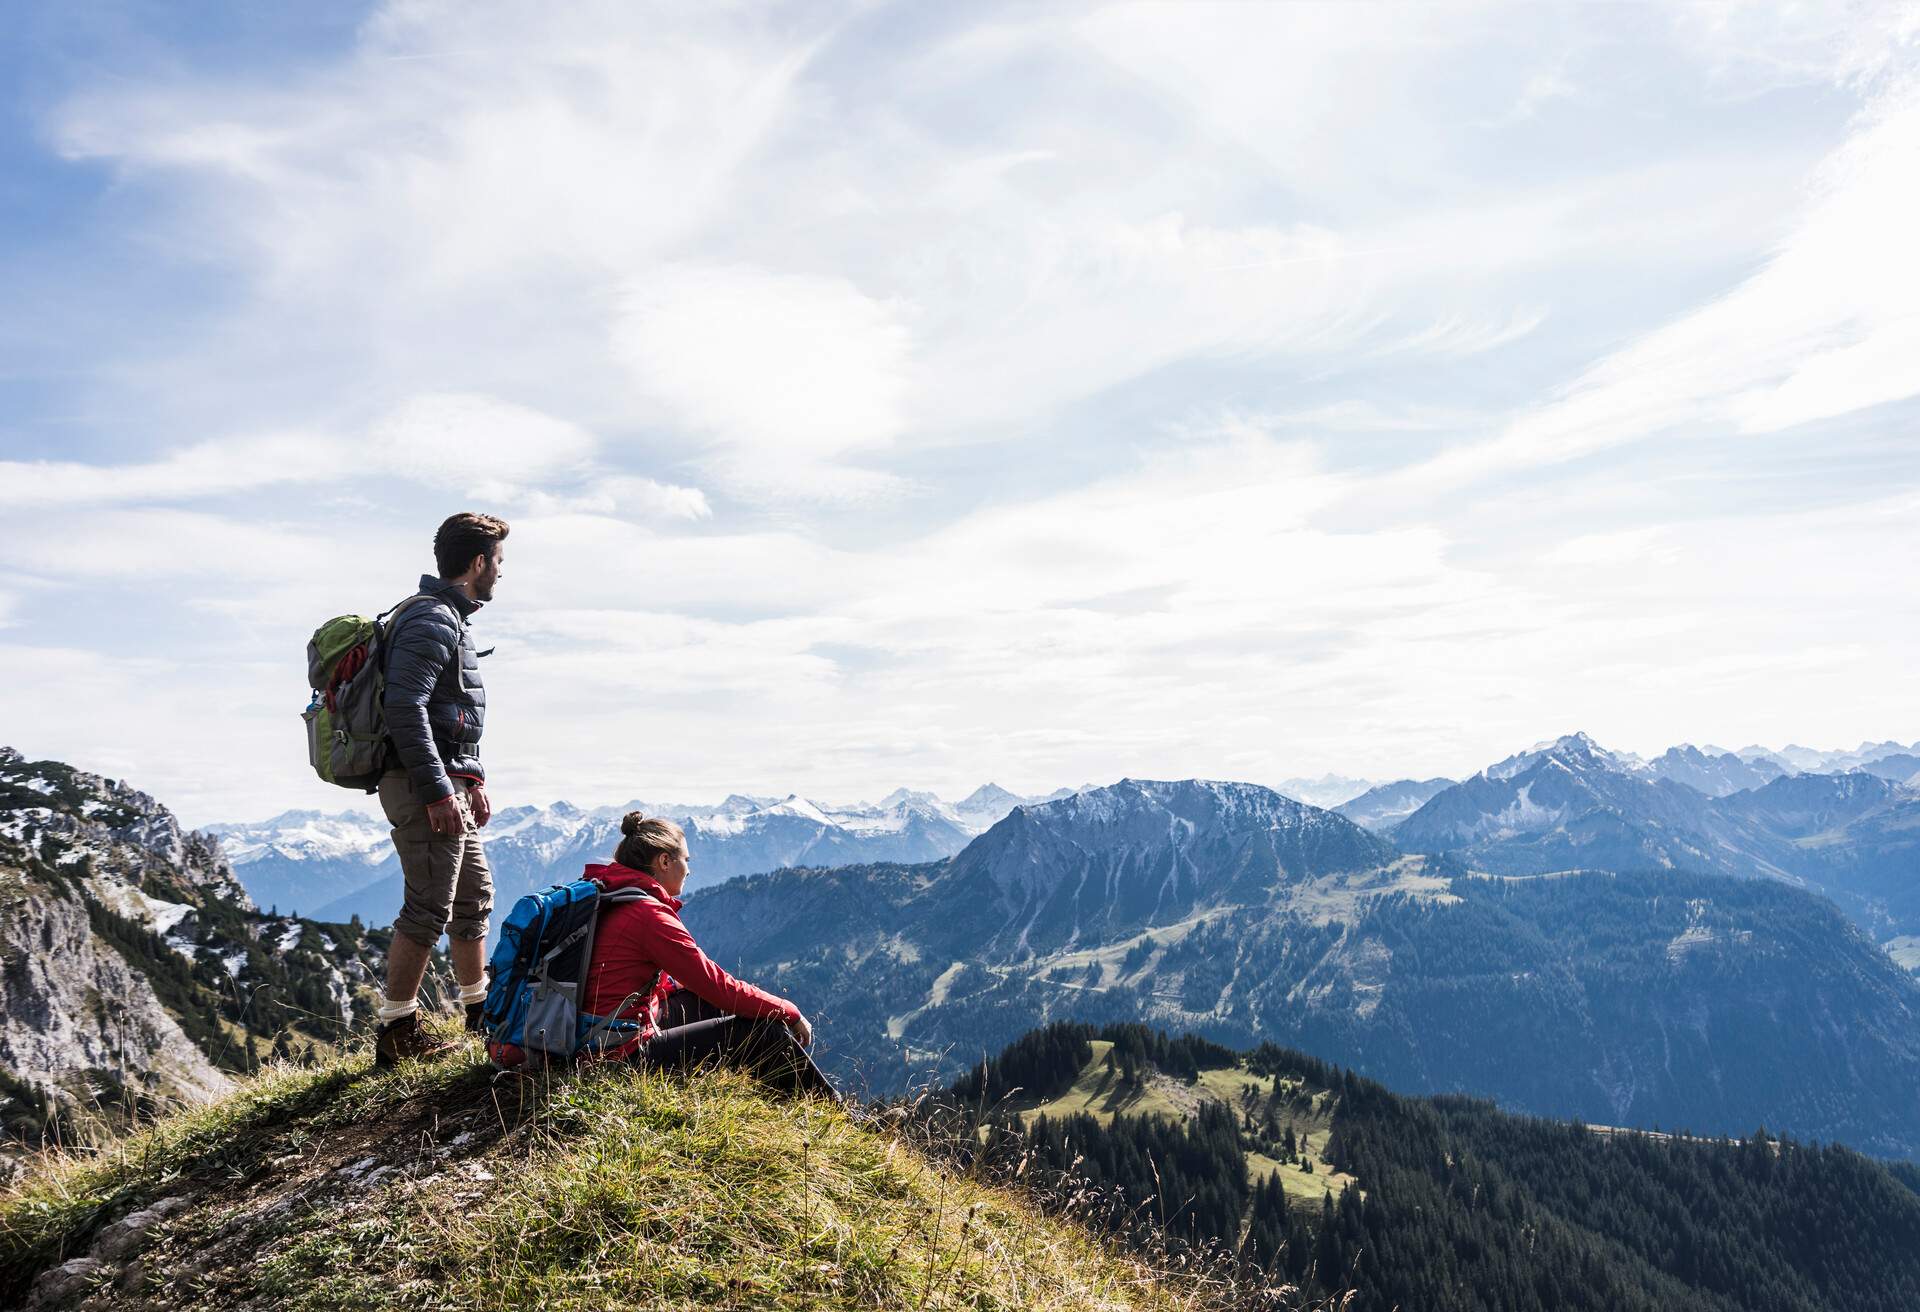 DEST_AUSTRIA_TYROL_HIKING_MOUNTAIN_NATURE_PEOPLE_GettyImages-932632504